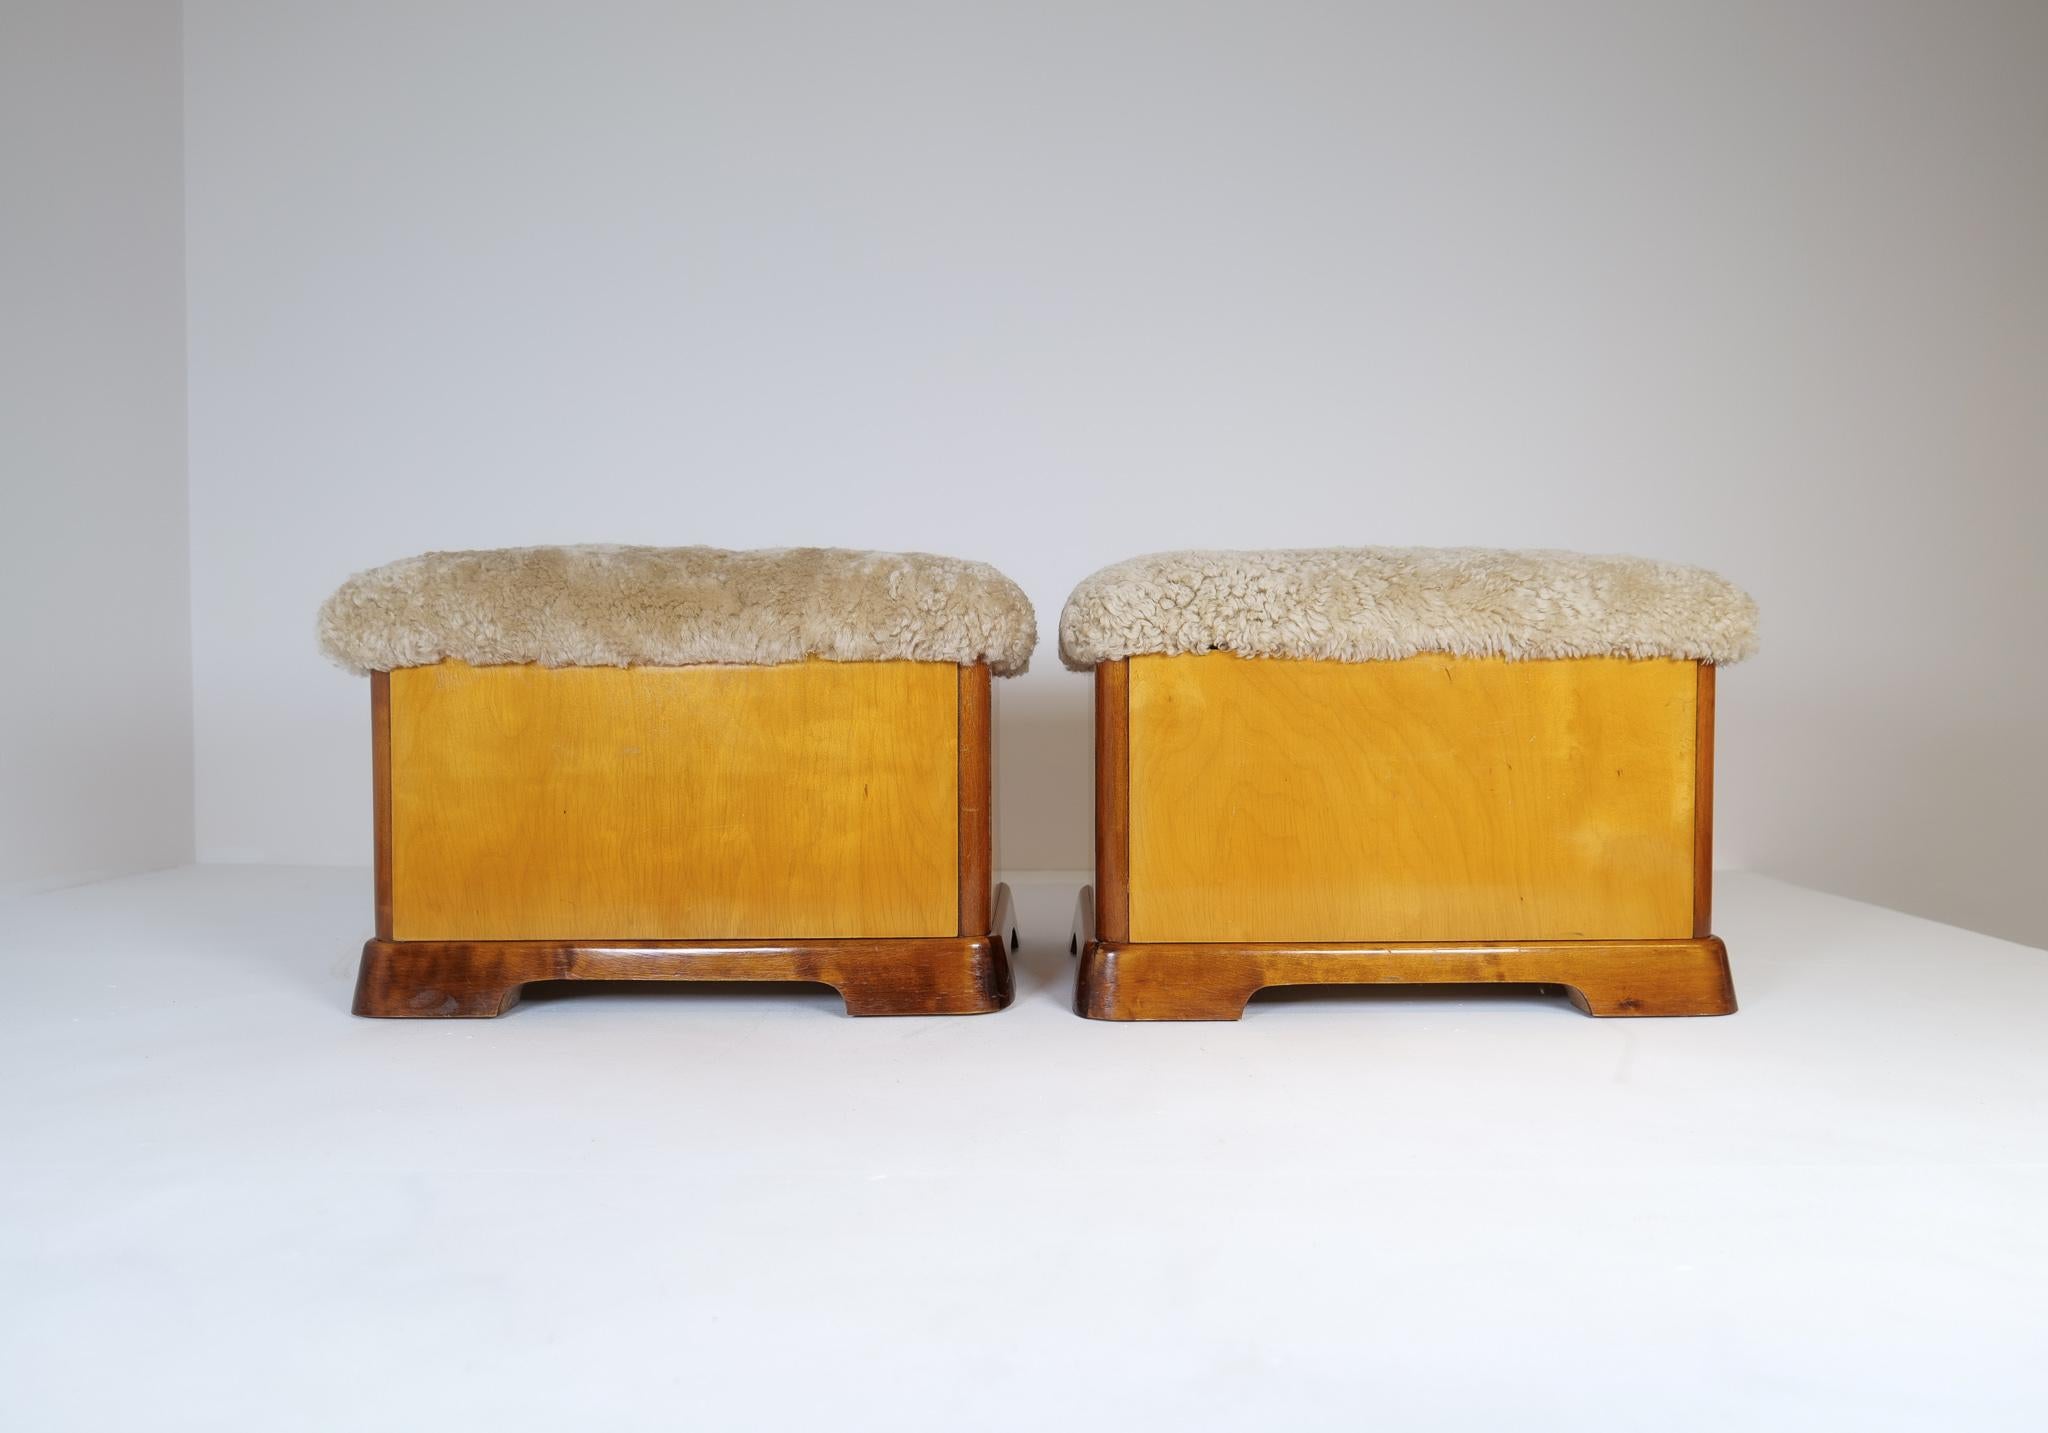 Swedish Art Deco Stools in Lacquered Birch and Sheepskin/Shearling Seat 1940s For Sale 2